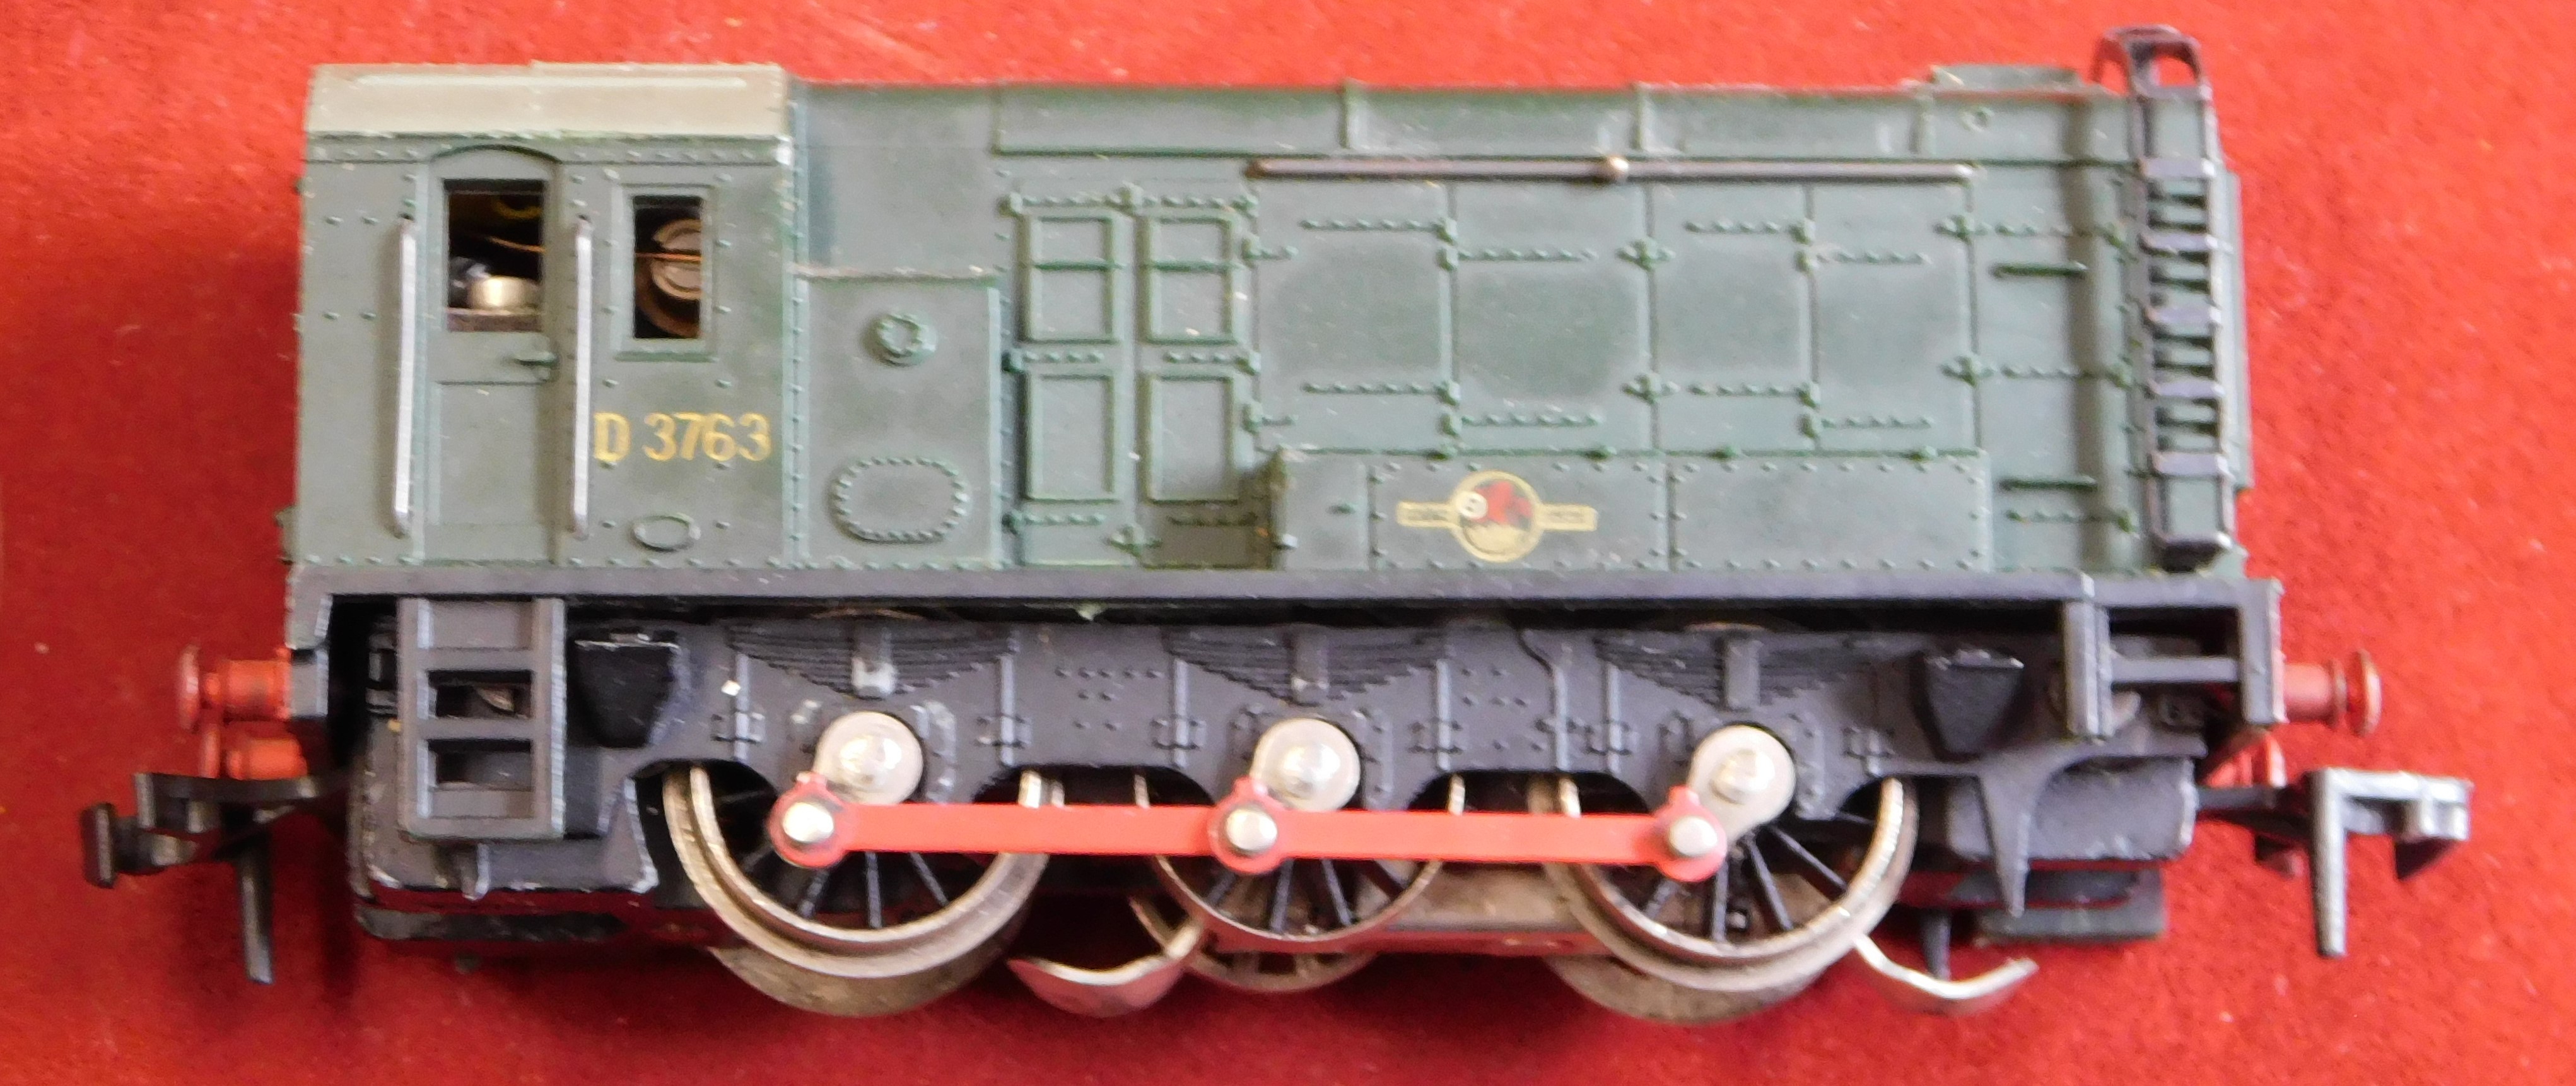 Hornby Dublo 'OO' Gauge 4x various locomotives, 4x various wagons and coaches - Image 3 of 6